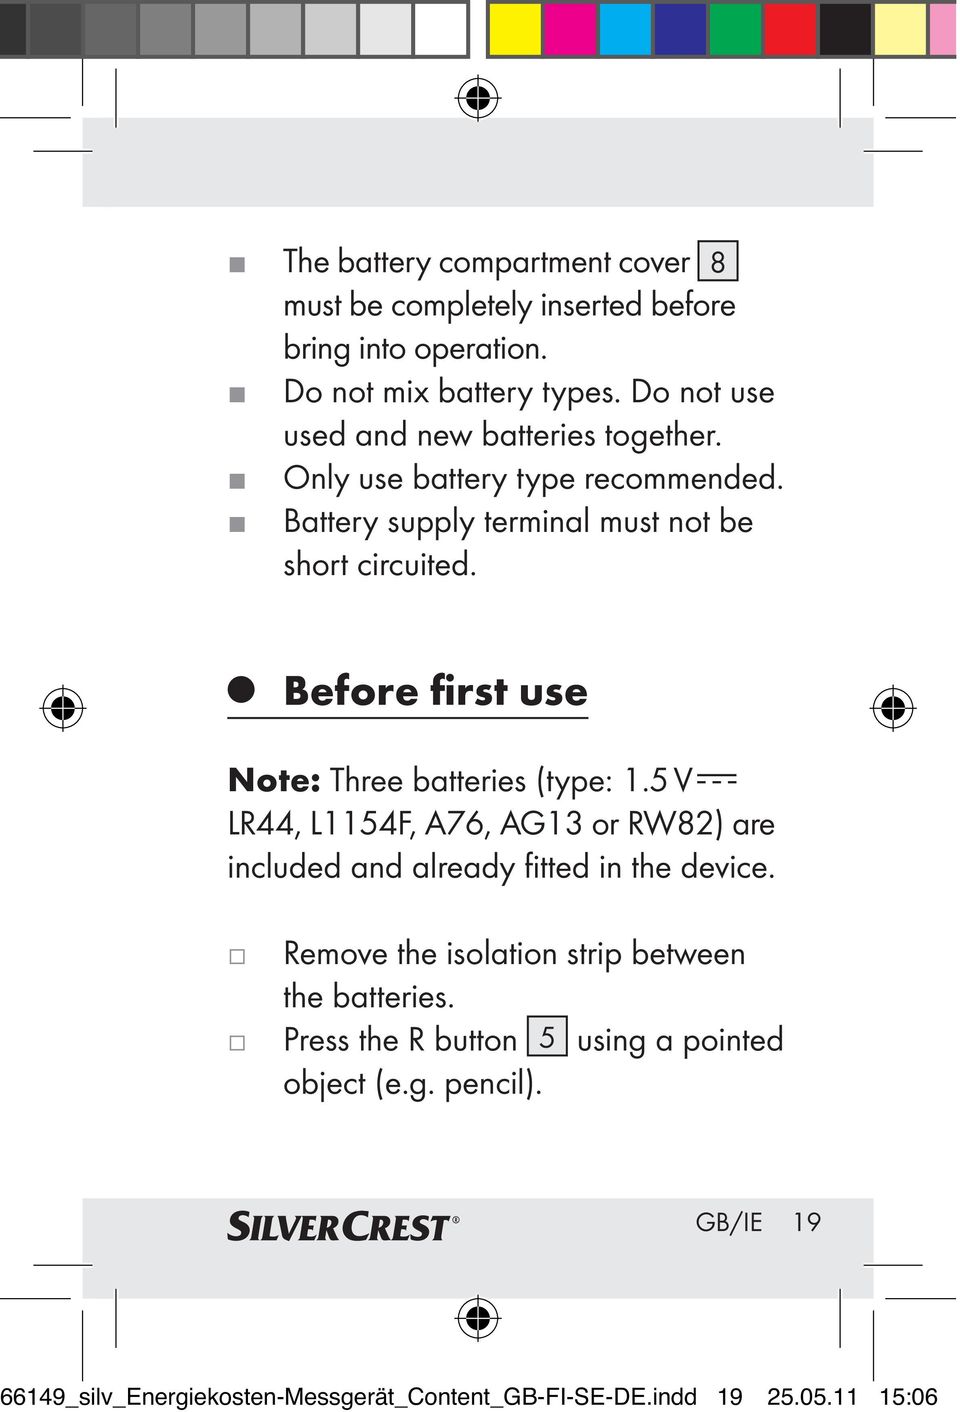 Before first use Note: Three batteries (type: 1.5 V LR44, L1154F, A76, AG13 or RW82) are included and already fitted in the device.